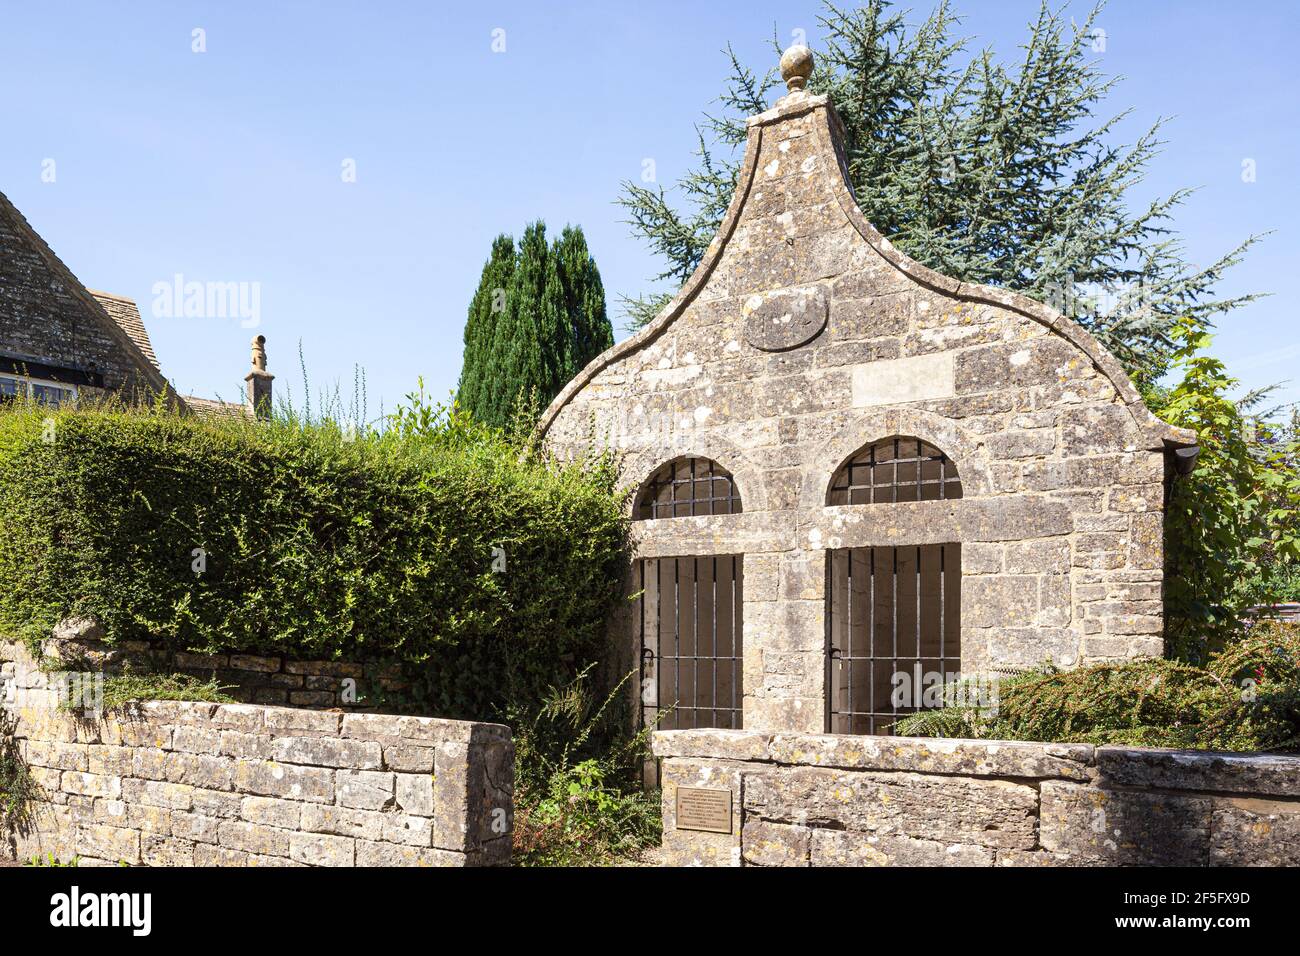 The old stone lockup dating from 1824 in the Cotswold village of Bisley, Gloucestershire UK Stock Photo